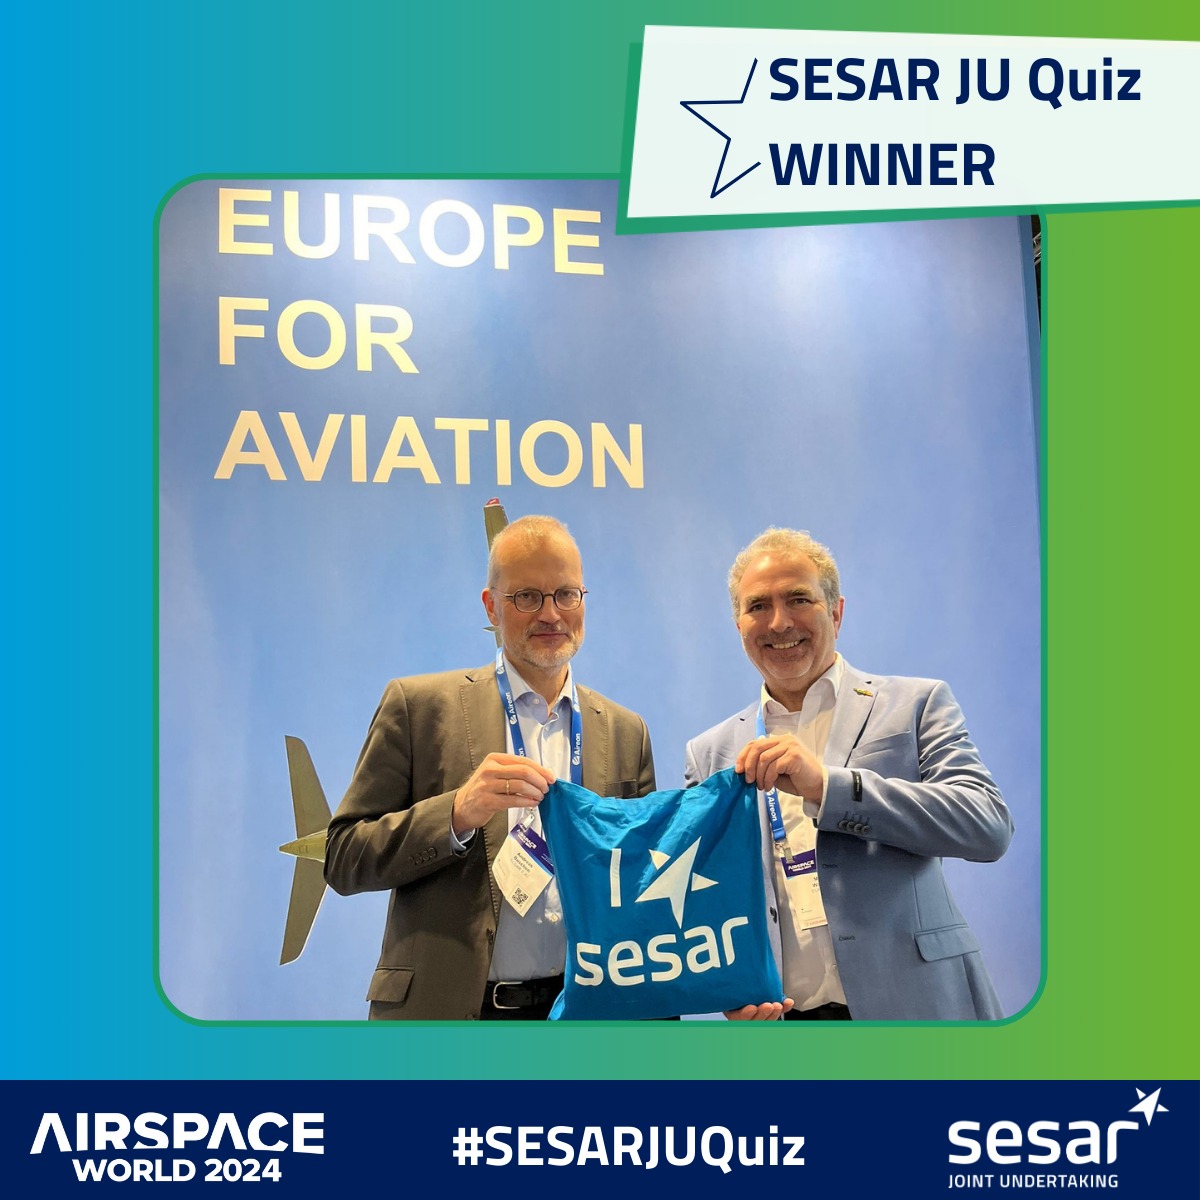 Congratulations to Mark Watson @EUROCAE1, the winner of the #SESARJUQuiz @AirspaceWorld 🥳Thanks to all those who played! 💡If you want to boost your #knolwedge about ATM tranasformation, visit our SESAR solustion cataligue/projects portal👇 sesarju.eu #ASW24